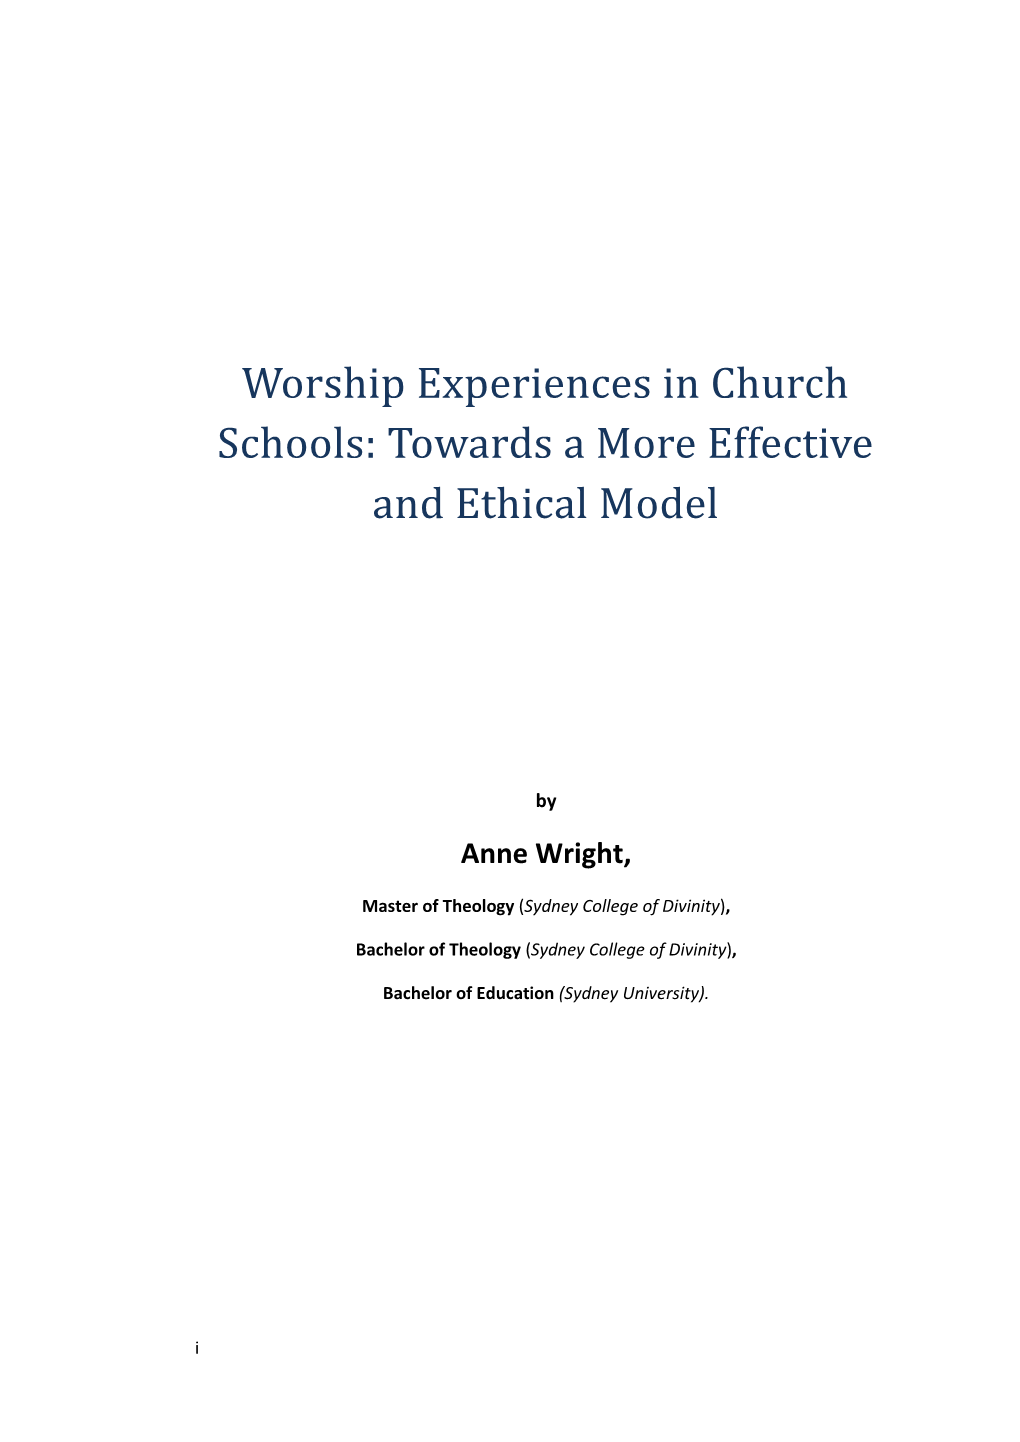 Worship Experiences in Church Schools: Towards a More Effective and Ethical Model